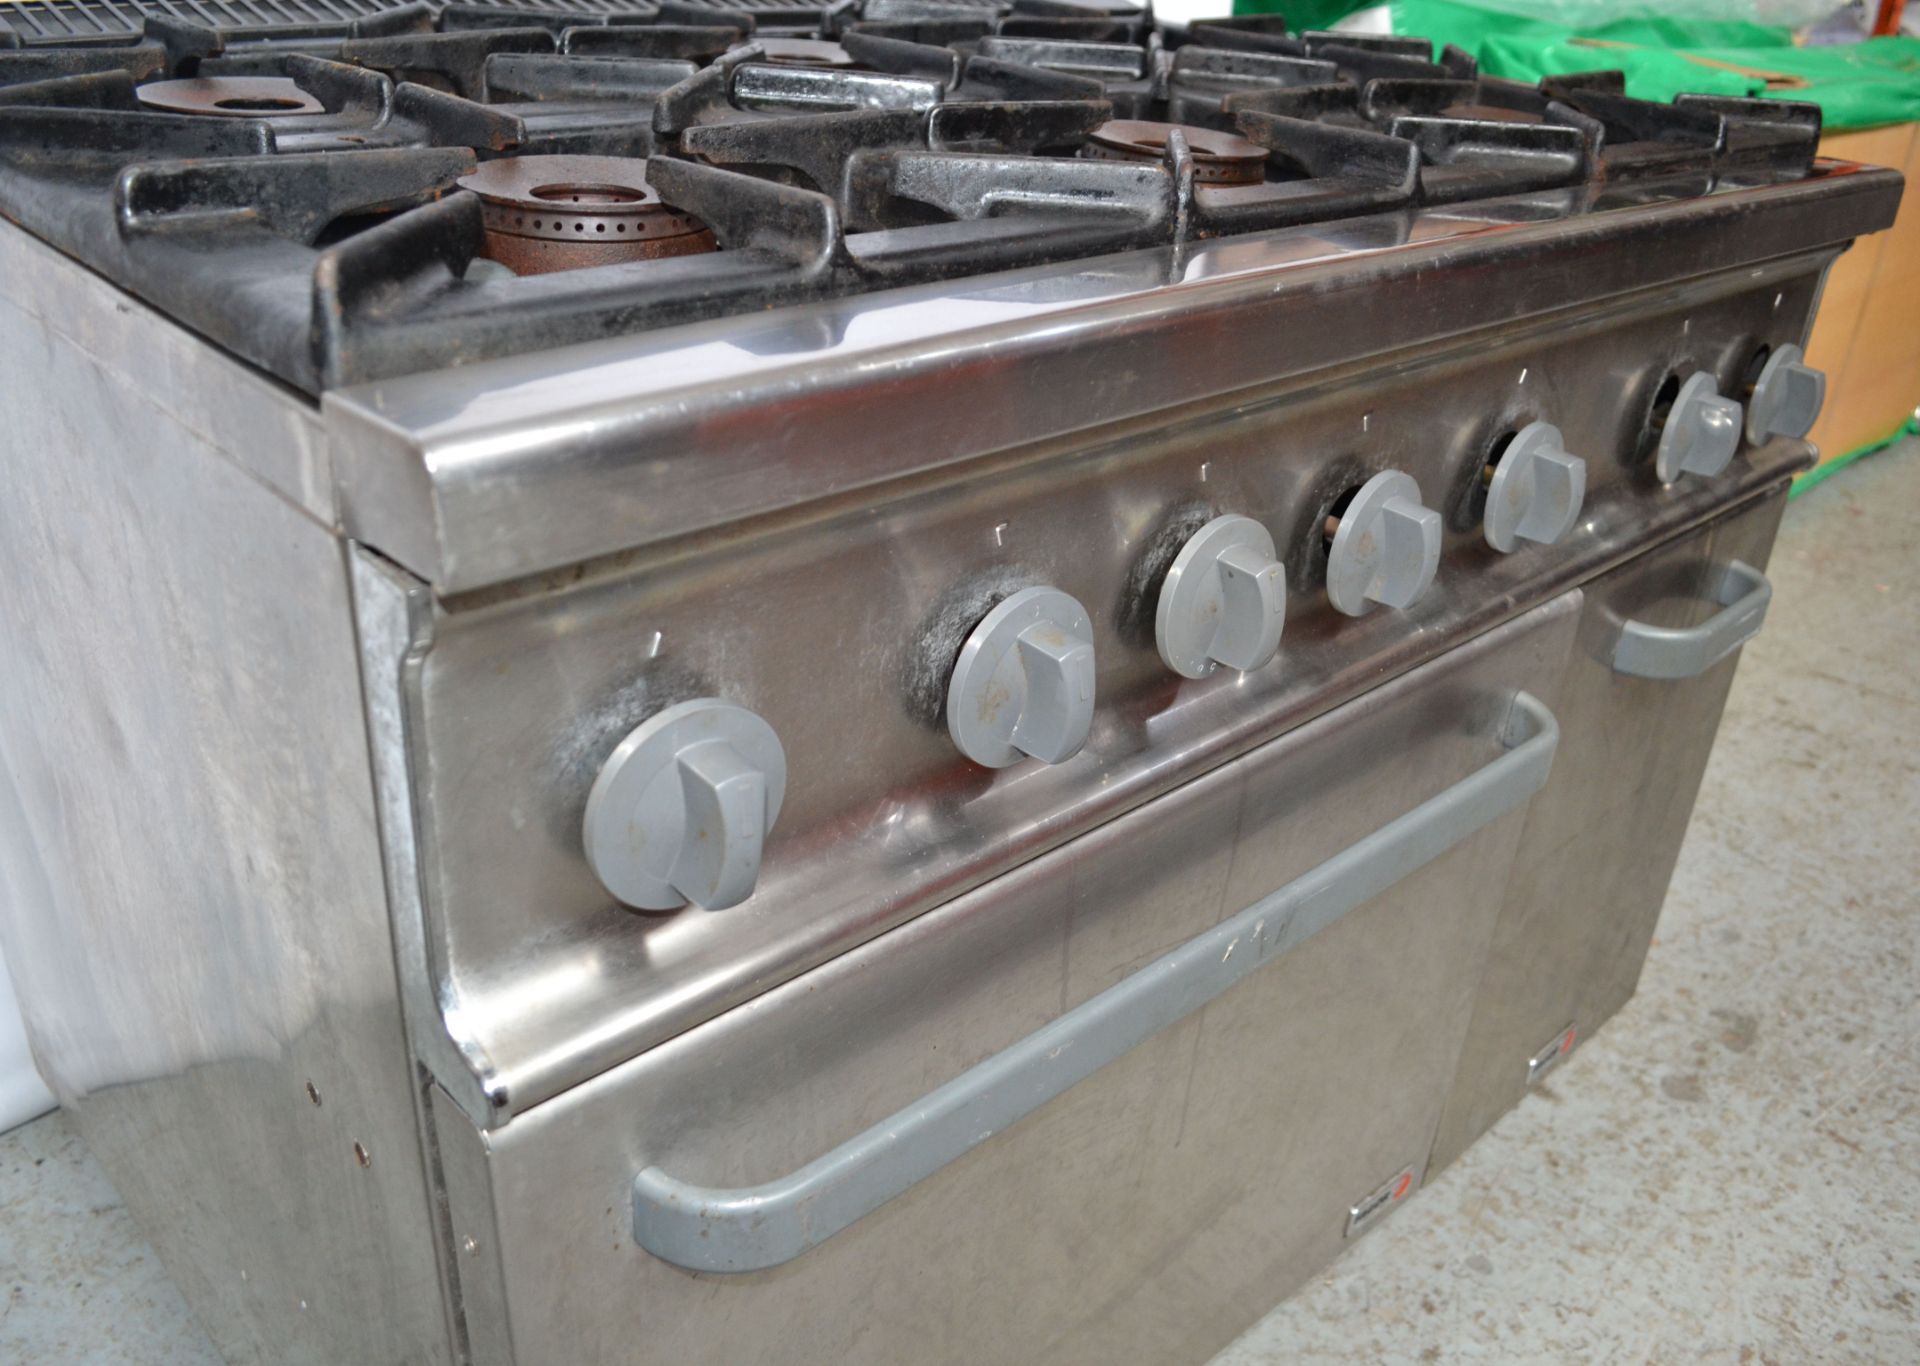 1 x Fagor Six Burner Gas Oven Range (CG-761 BR SM) - Ref NCE011 - CL178 - Location: Altrincham - Image 7 of 15